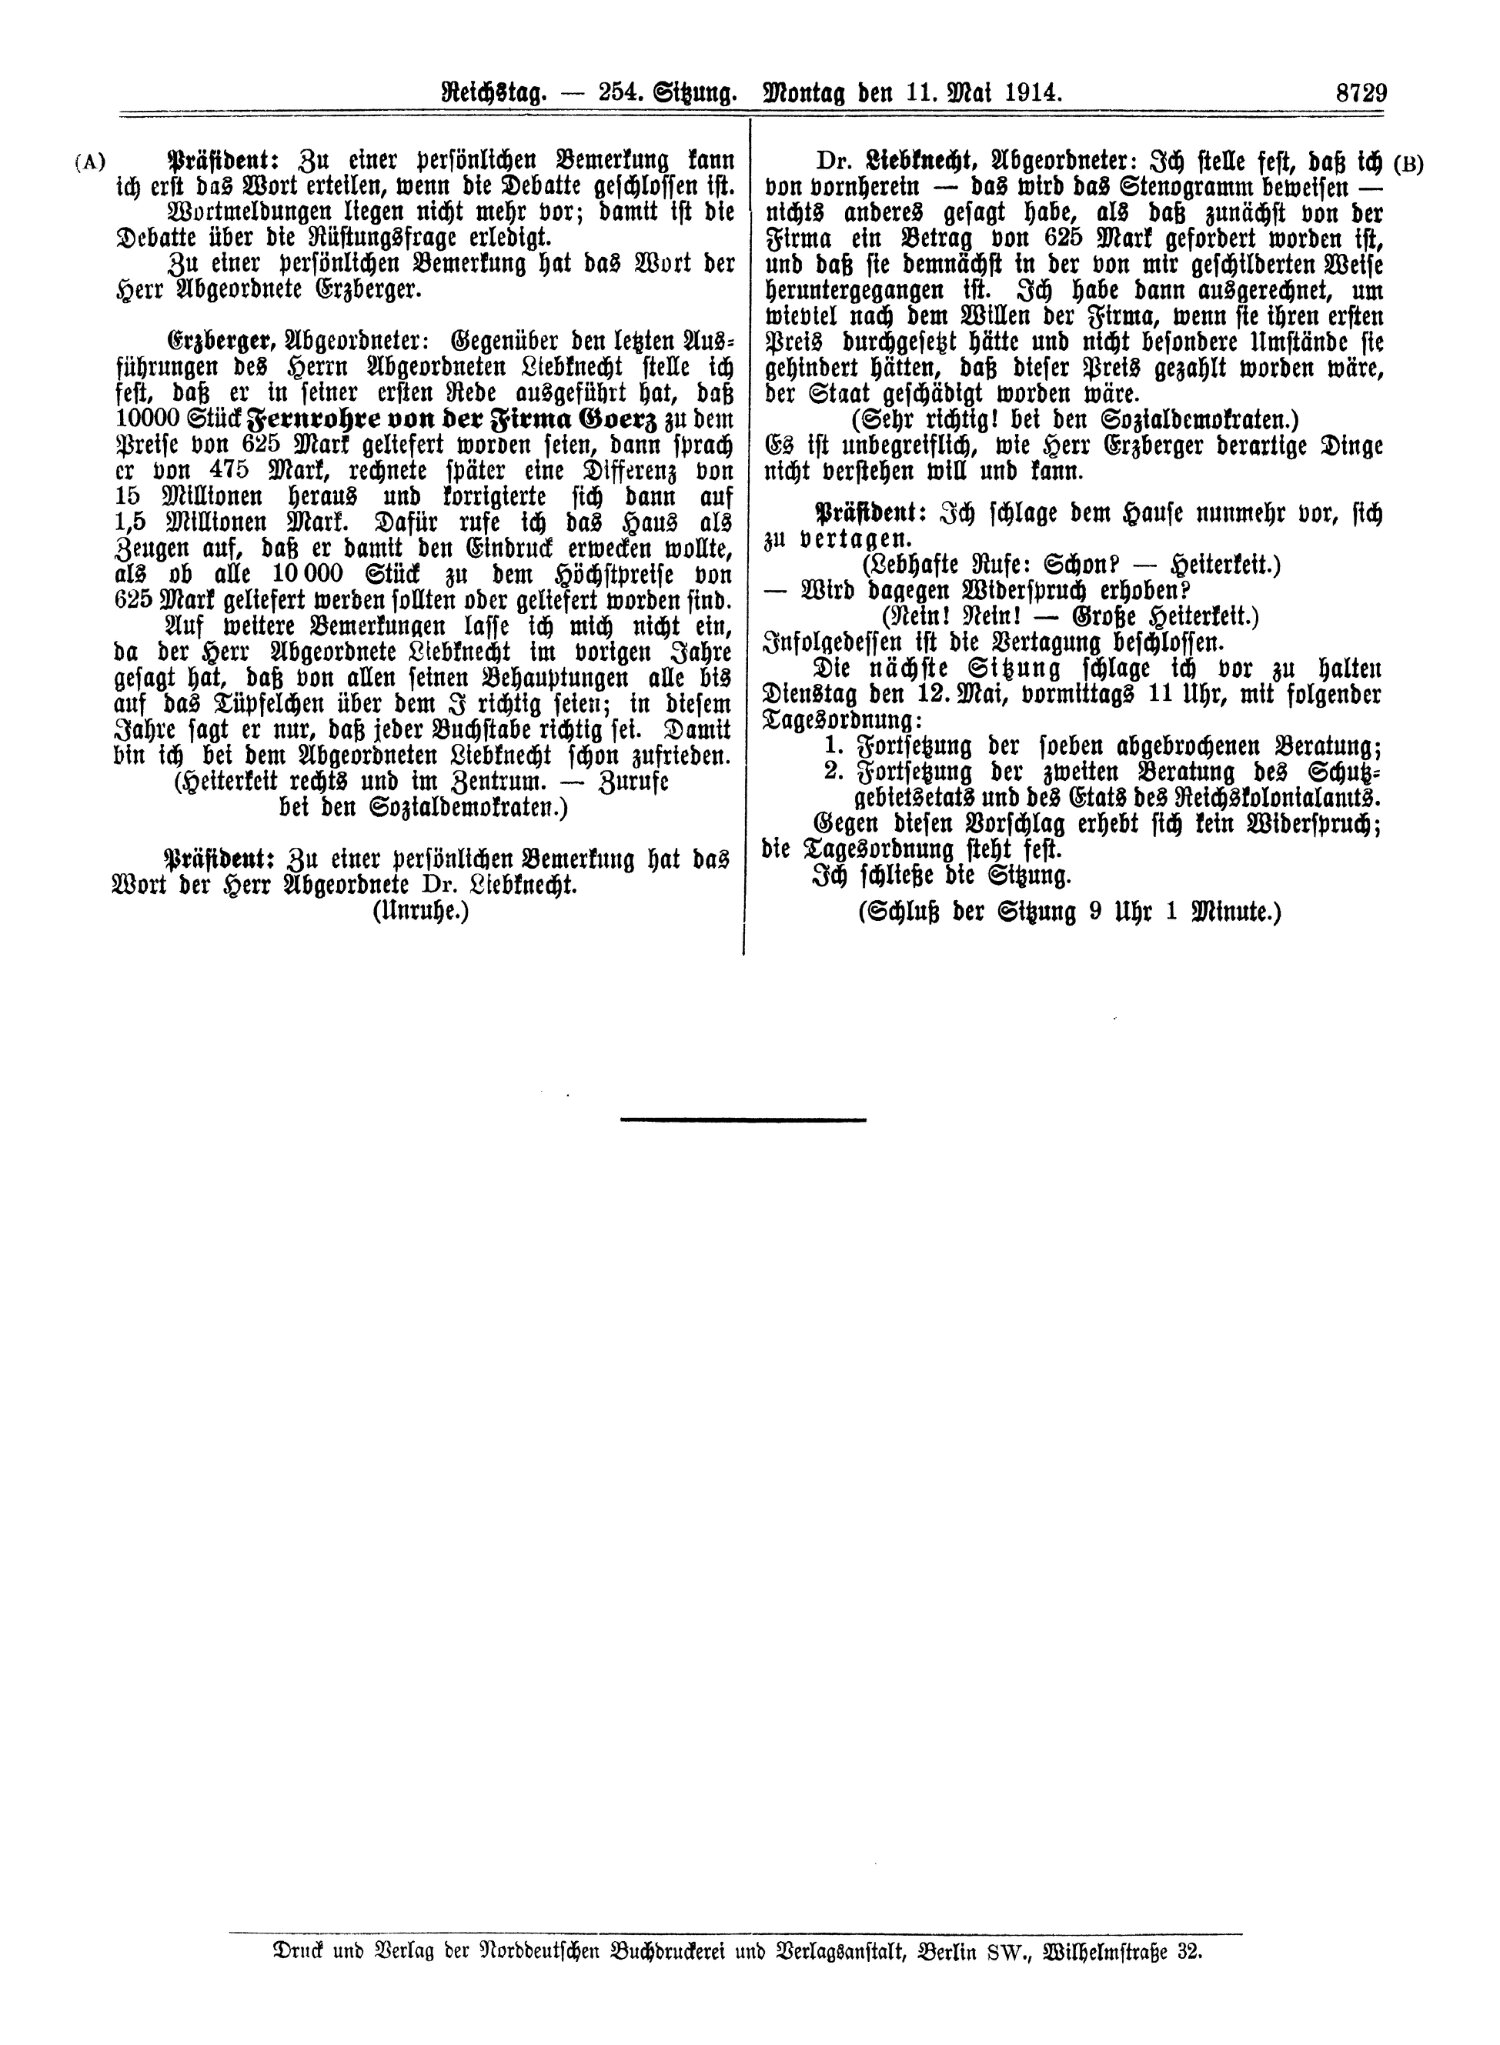 Scan of page 8729